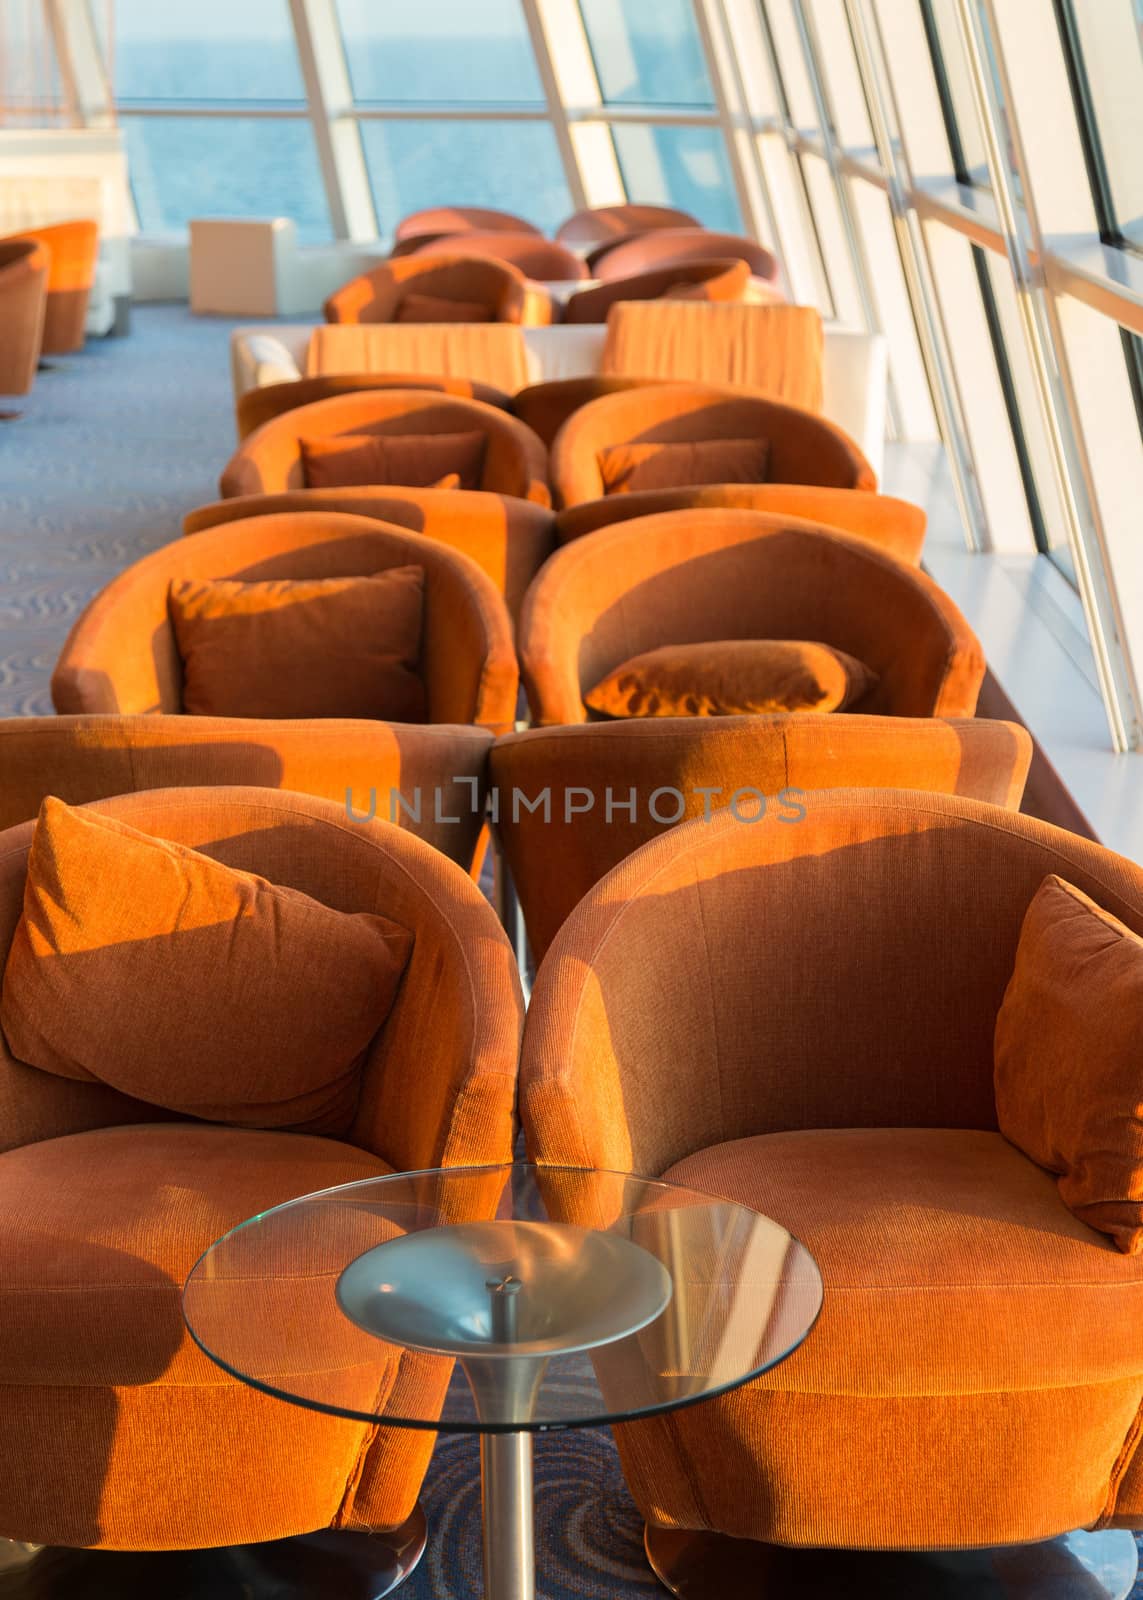 Row of cushioned seats or chairs and towel by high glass window looking out to sea with horizon in the distance